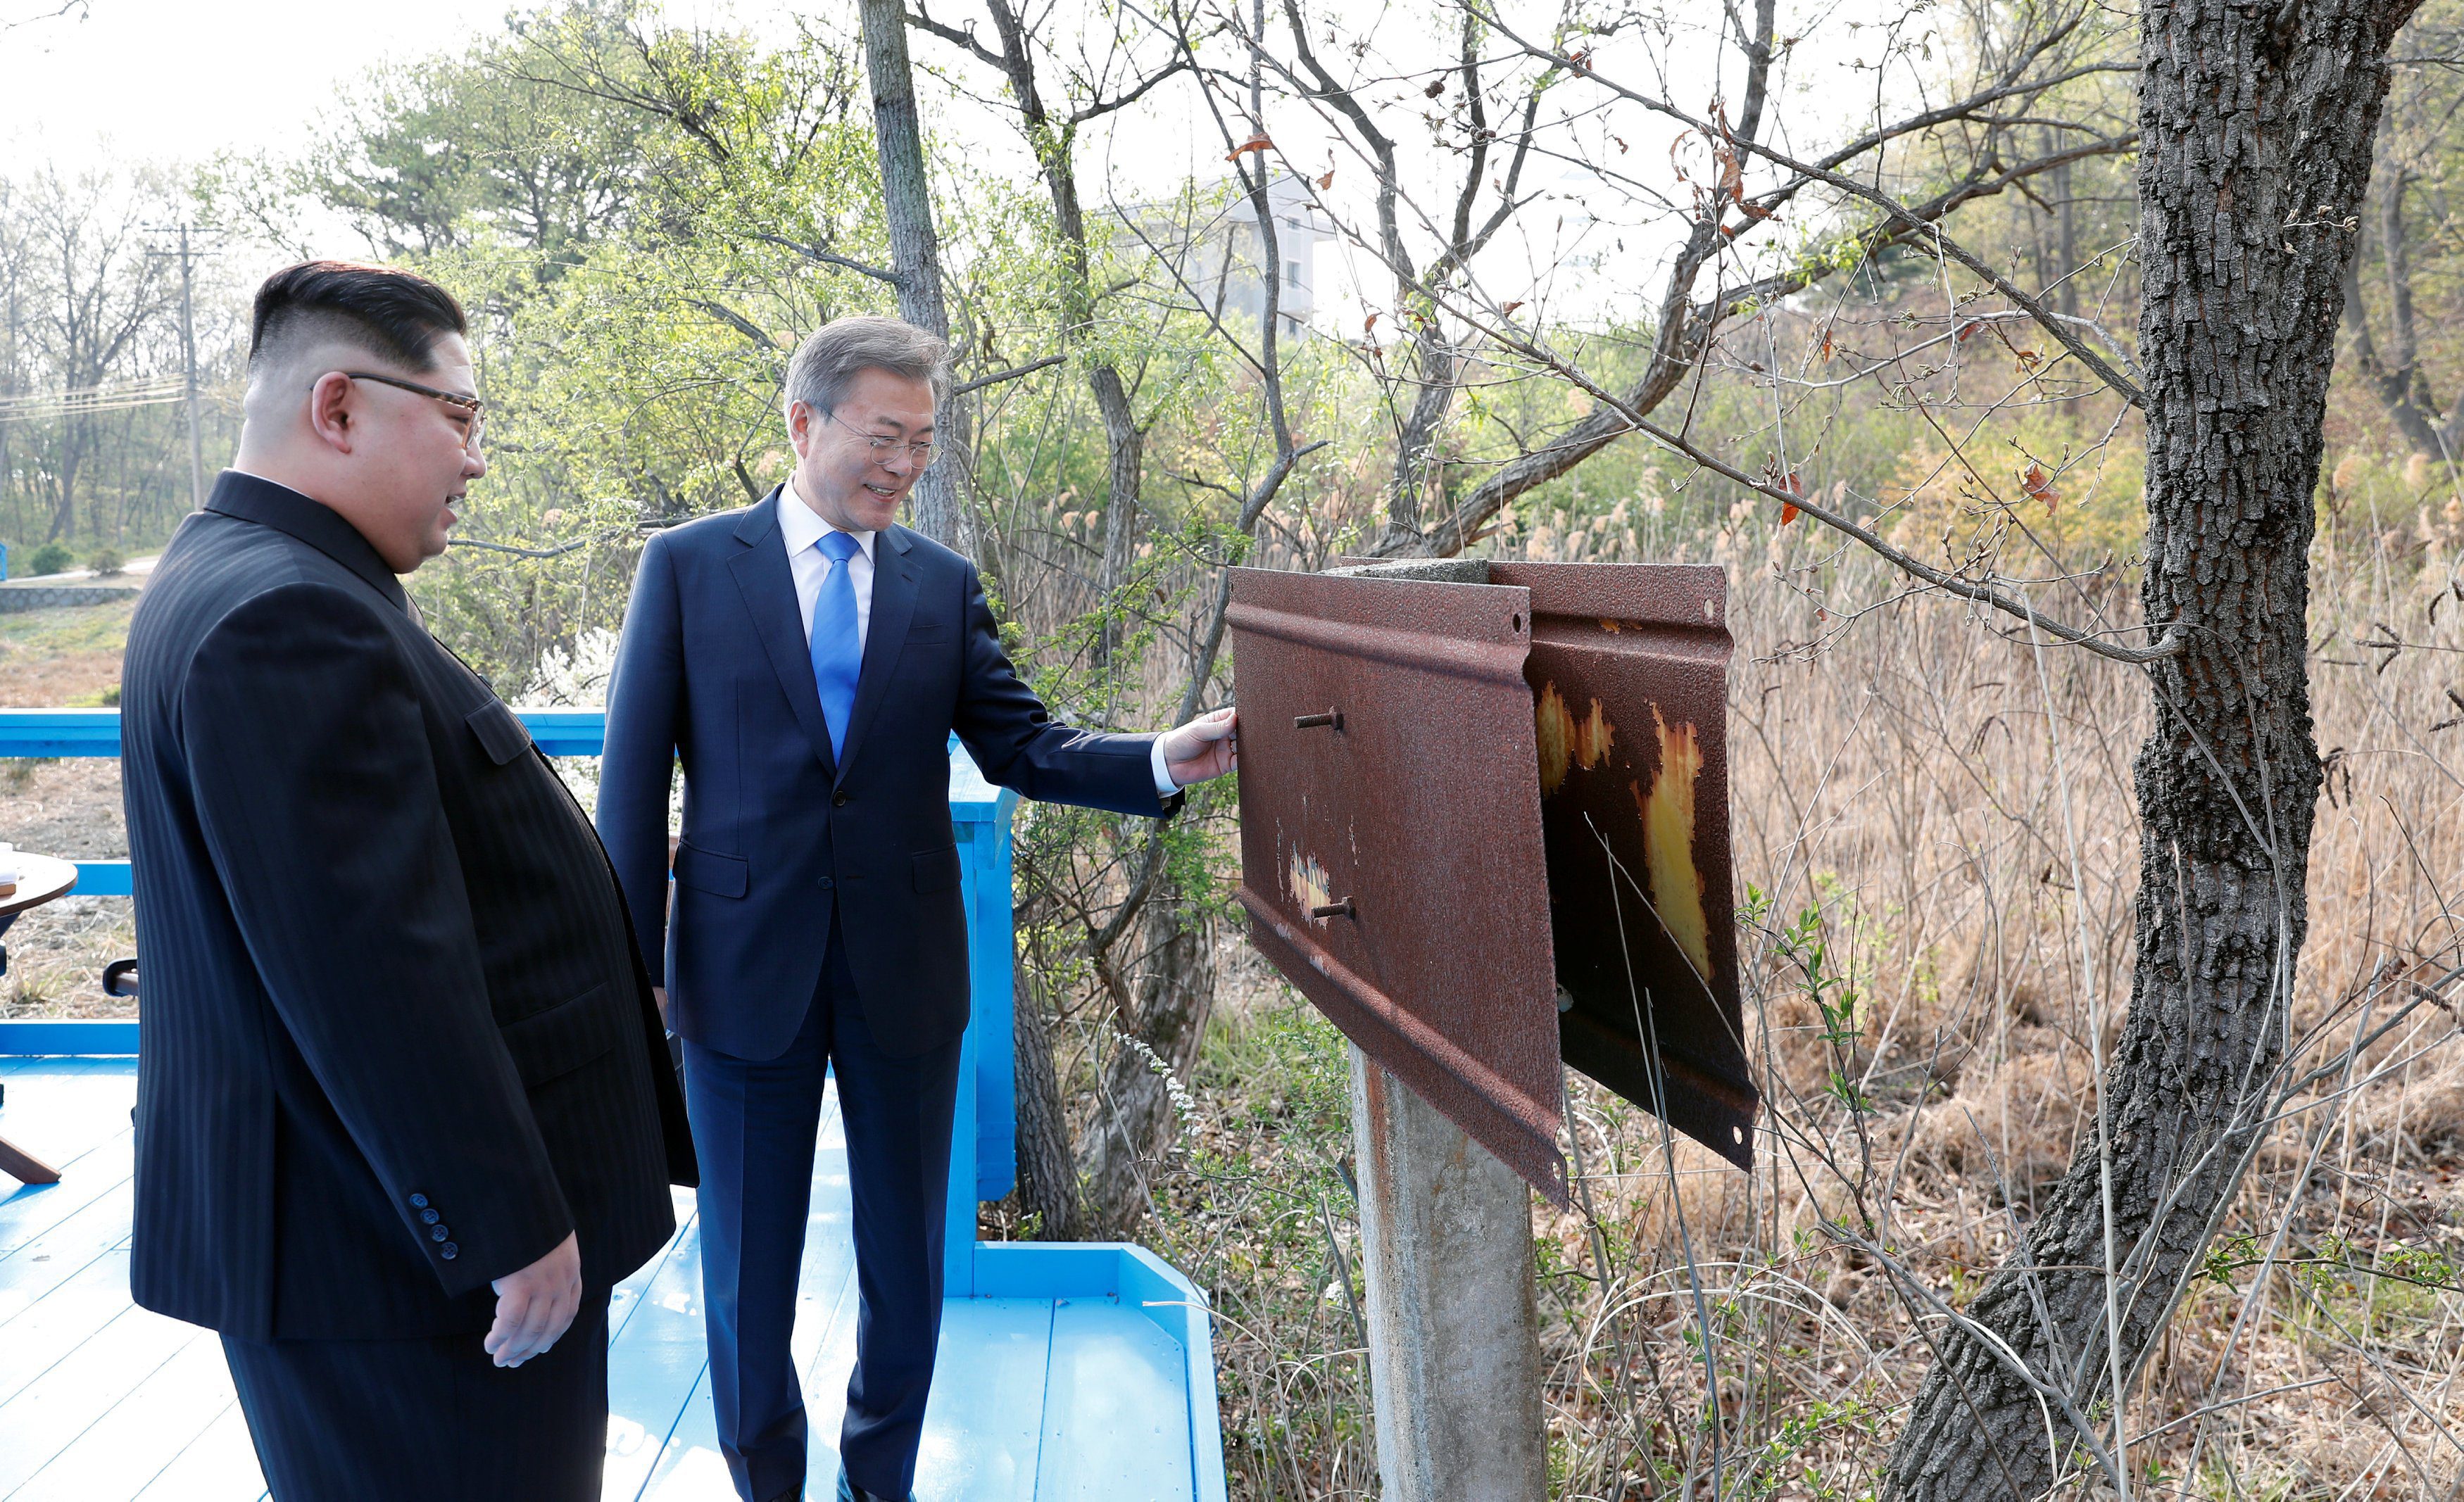 South Korean President Moon Jae-in and North Korean leader Kim Jong Un examine a rusted sign at the demarcation line at the truce village of Panmunjom